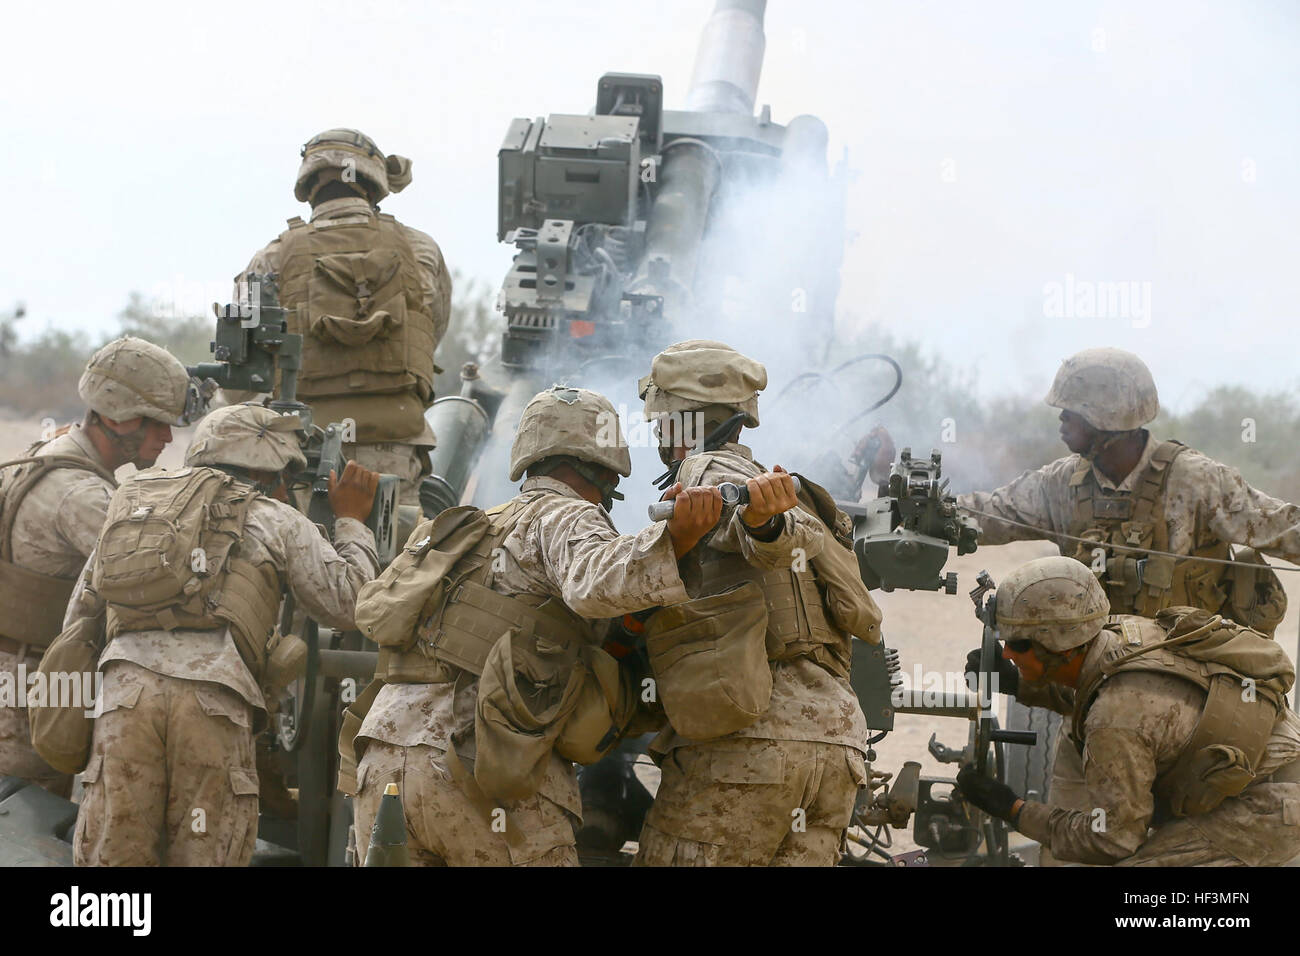 U.S. Marines with C Battery, 1st Battalion, 11th Marine Regiment, 1st Marine Division fire a M777 howitzer during an assault support tactics exercise at Fire Base Burt, Chocolate Mountain Aerial Gunnery Range, Calif., Oct. 12, 2015. The exercise is part of Weapons and Tactics Instructor (WTI) 1-16, a seven-week training event hosted by Marine Aviation Weapons and Tactics Squadron One (MAWTS-1) cadre. MAWTS-1 provides standardized tactical training and certification of unit instructor qualifications to support Marine Aviation Training and Readiness and assists in developing and employing aviati Stock Photo